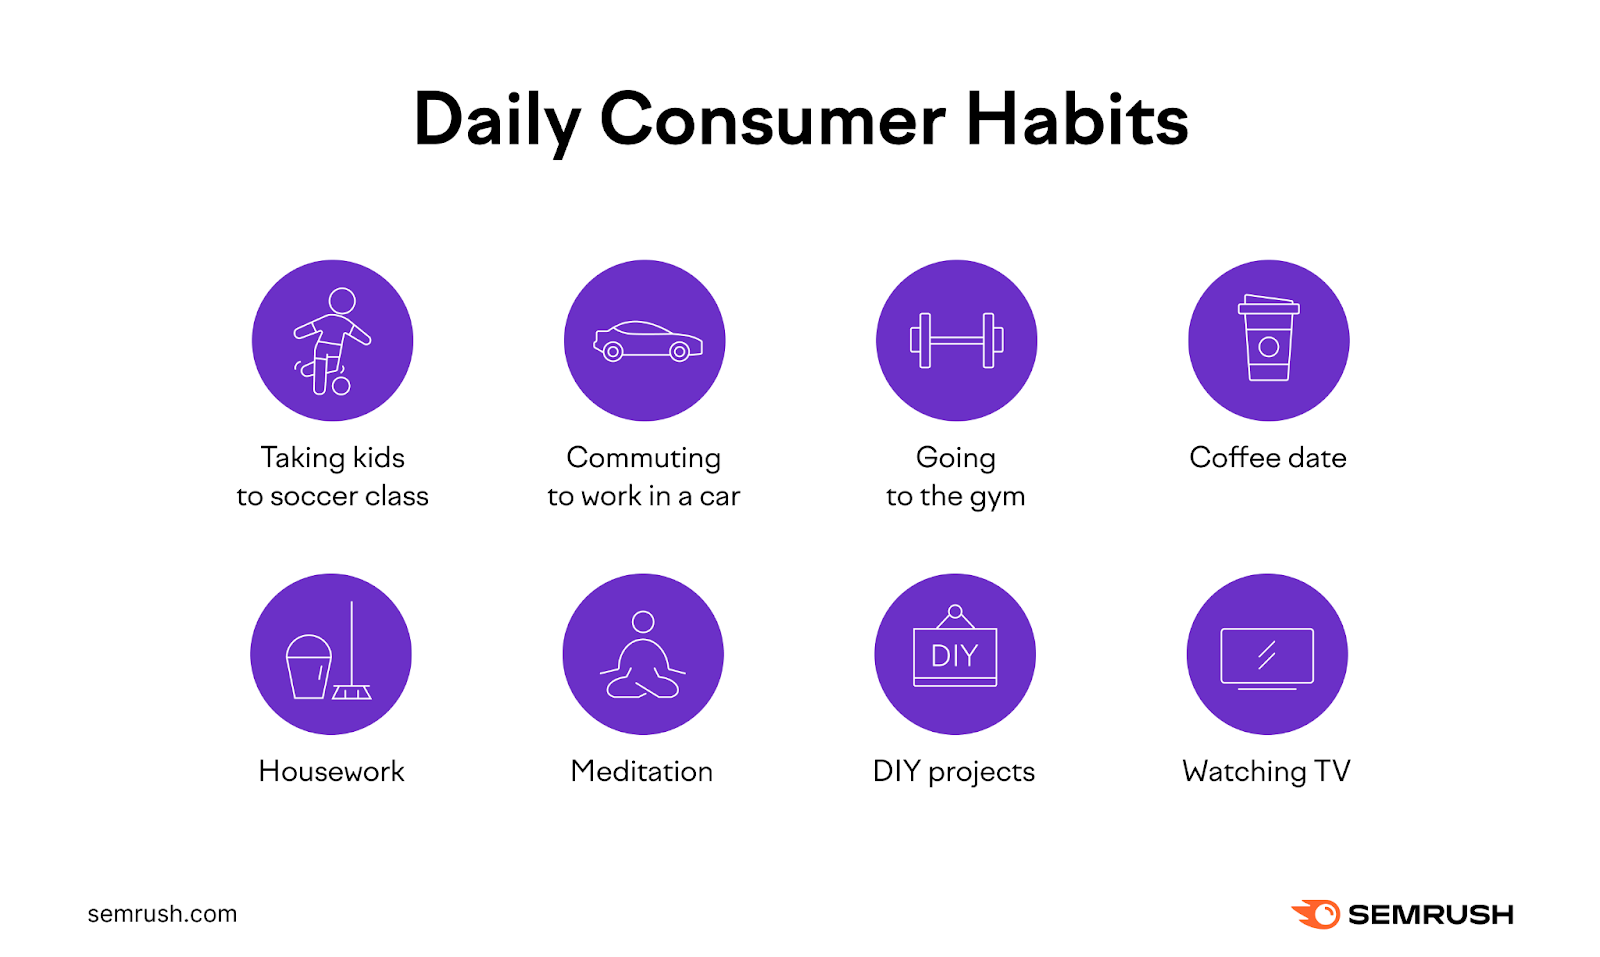 Examples of customers’ daily habits